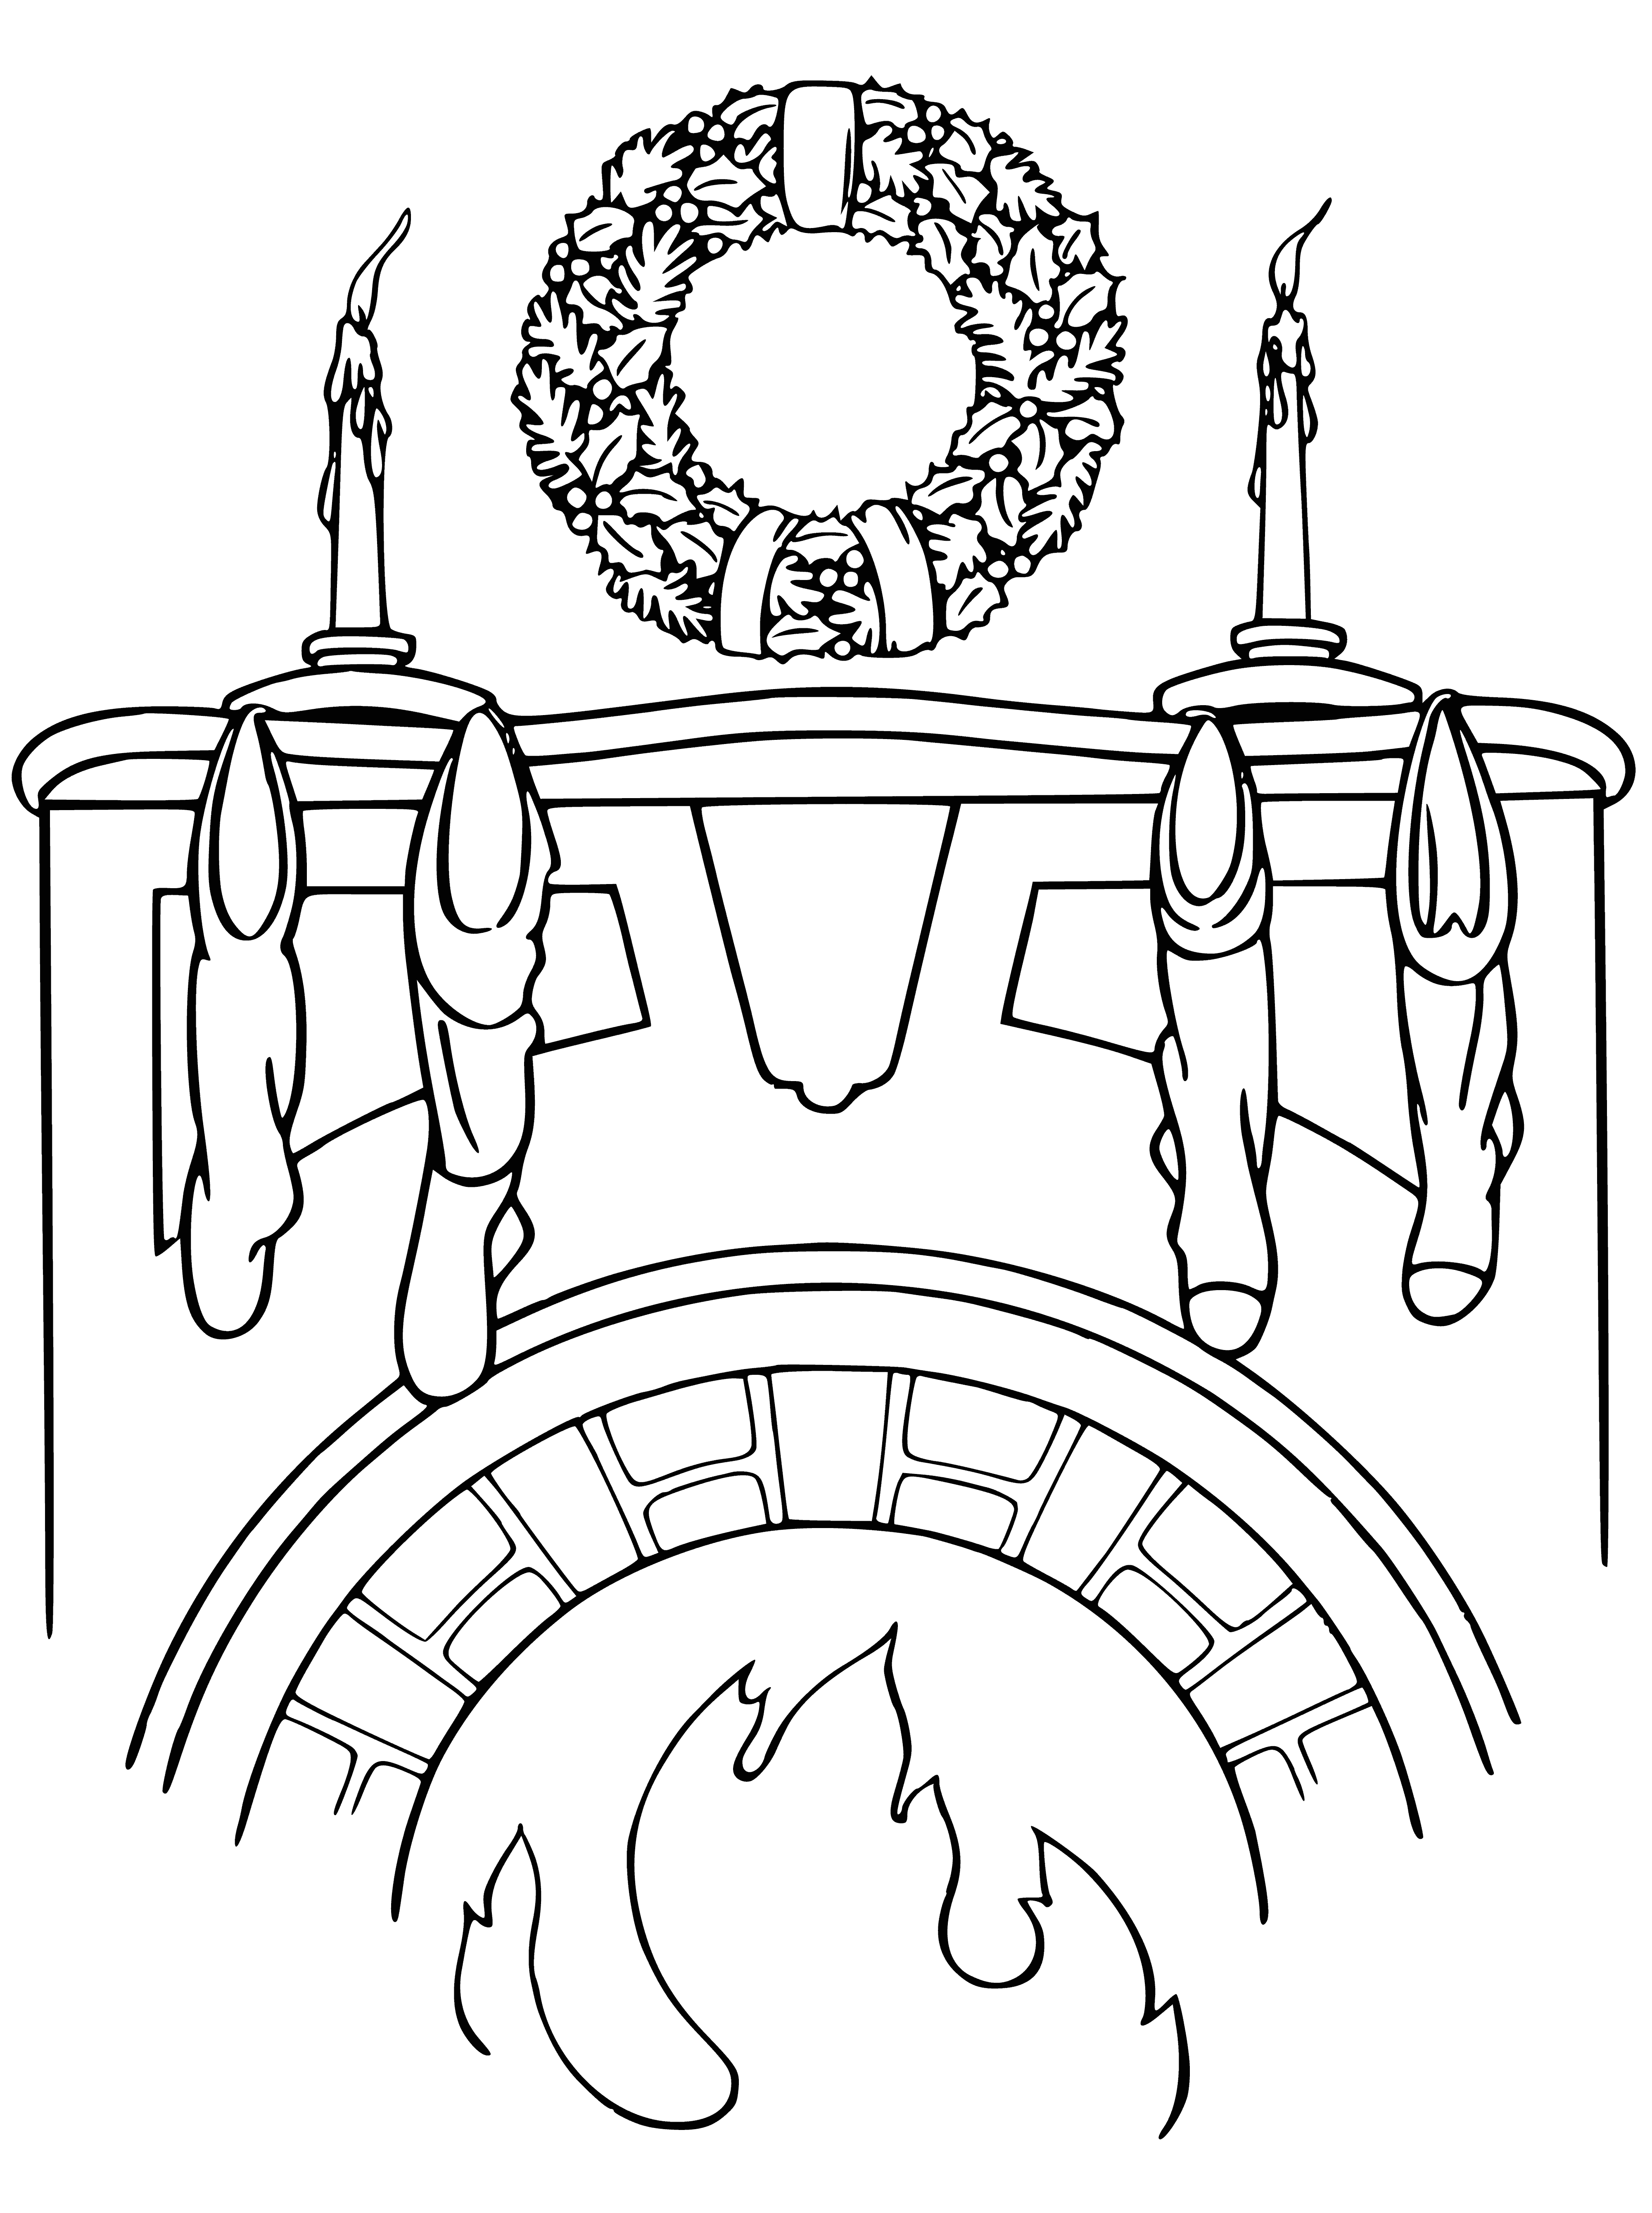 coloring page: Christmas fireplace with candles, wreath, garland, & hung stockings--all creating a festive holiday atmosphere.